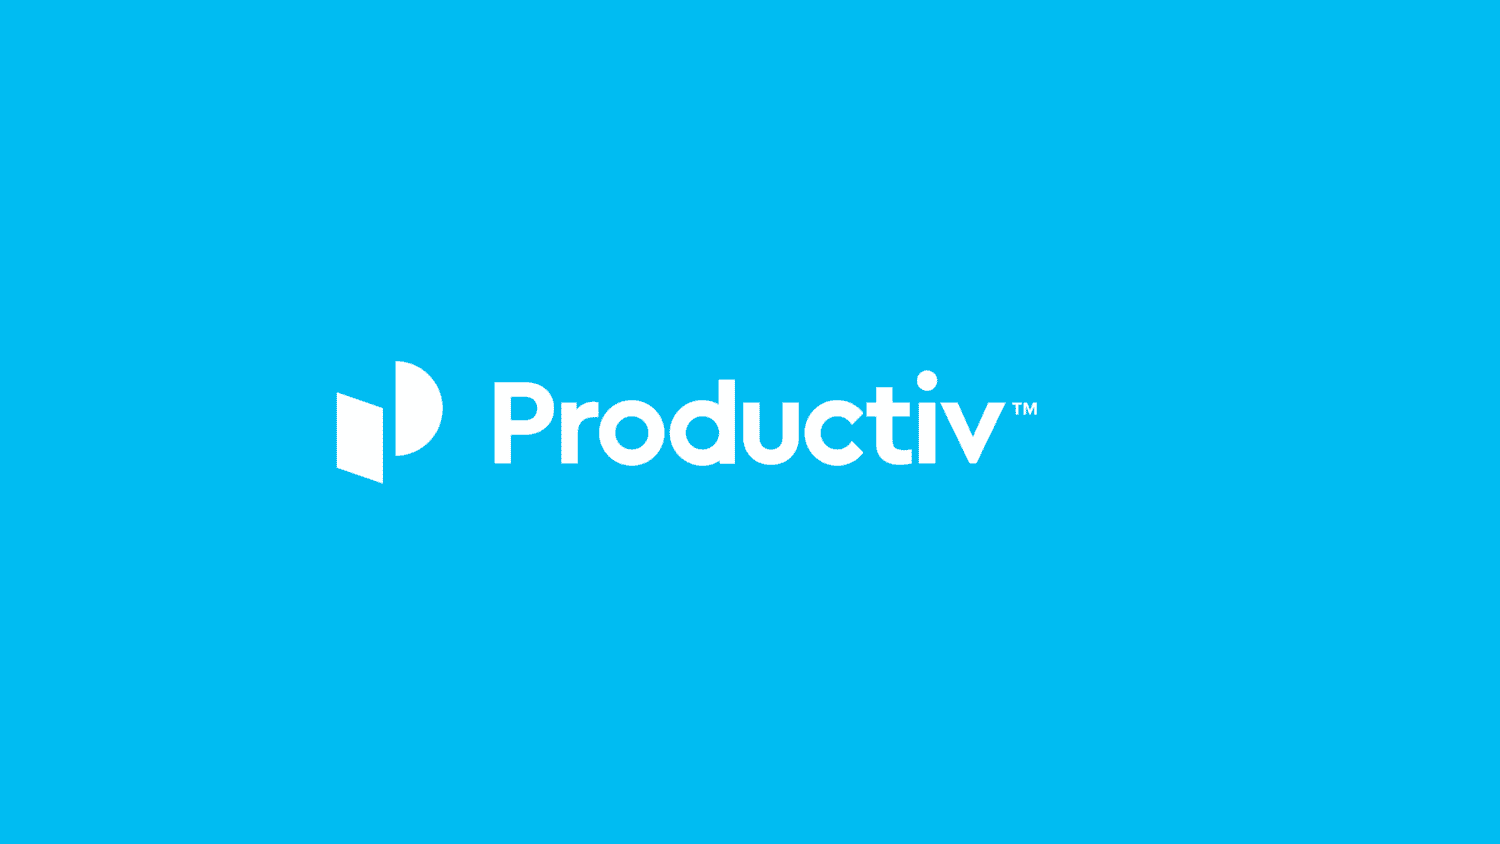 Three key use cases supported by the Productiv + Zoom integration